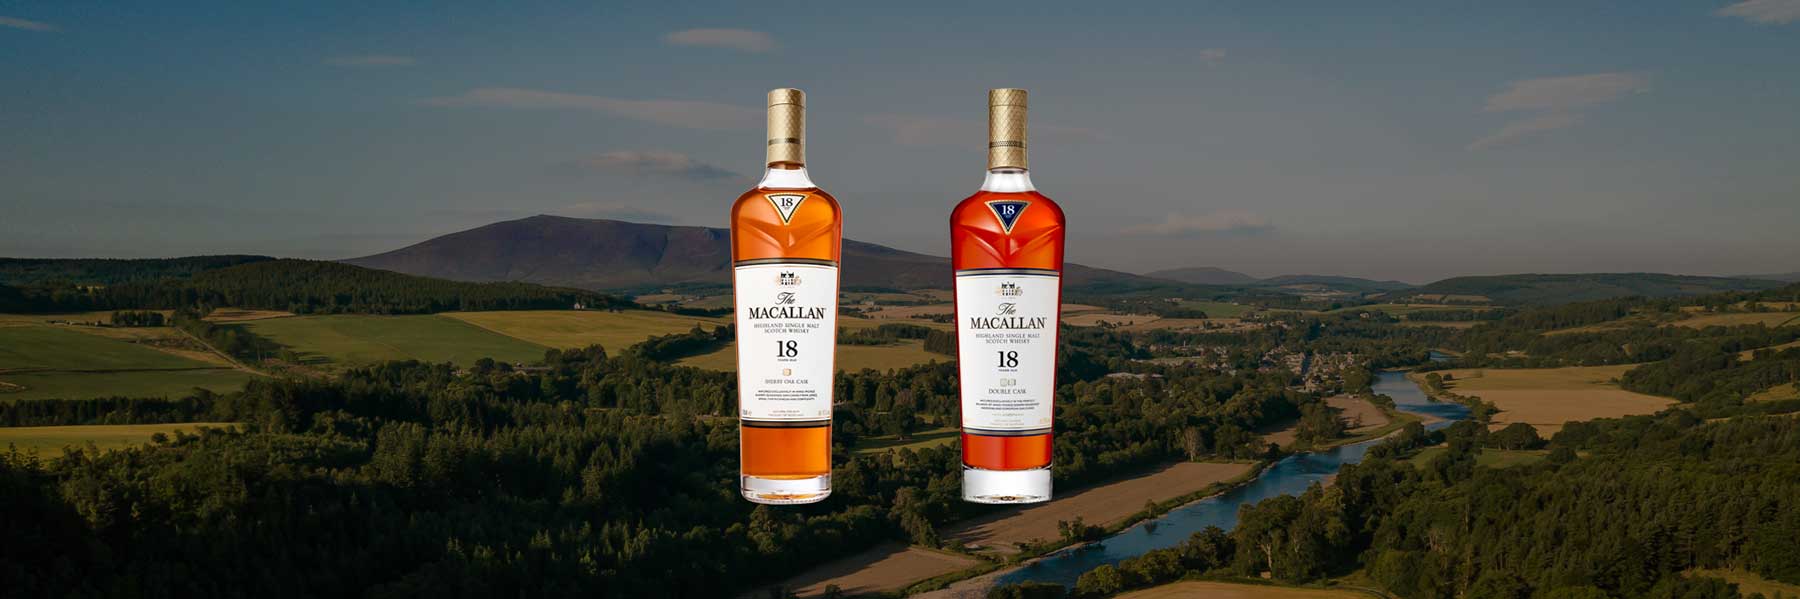 Macallan 18 Sherry Oak vs. Double Cask  |  A Personal Journey of Whisky Exploration